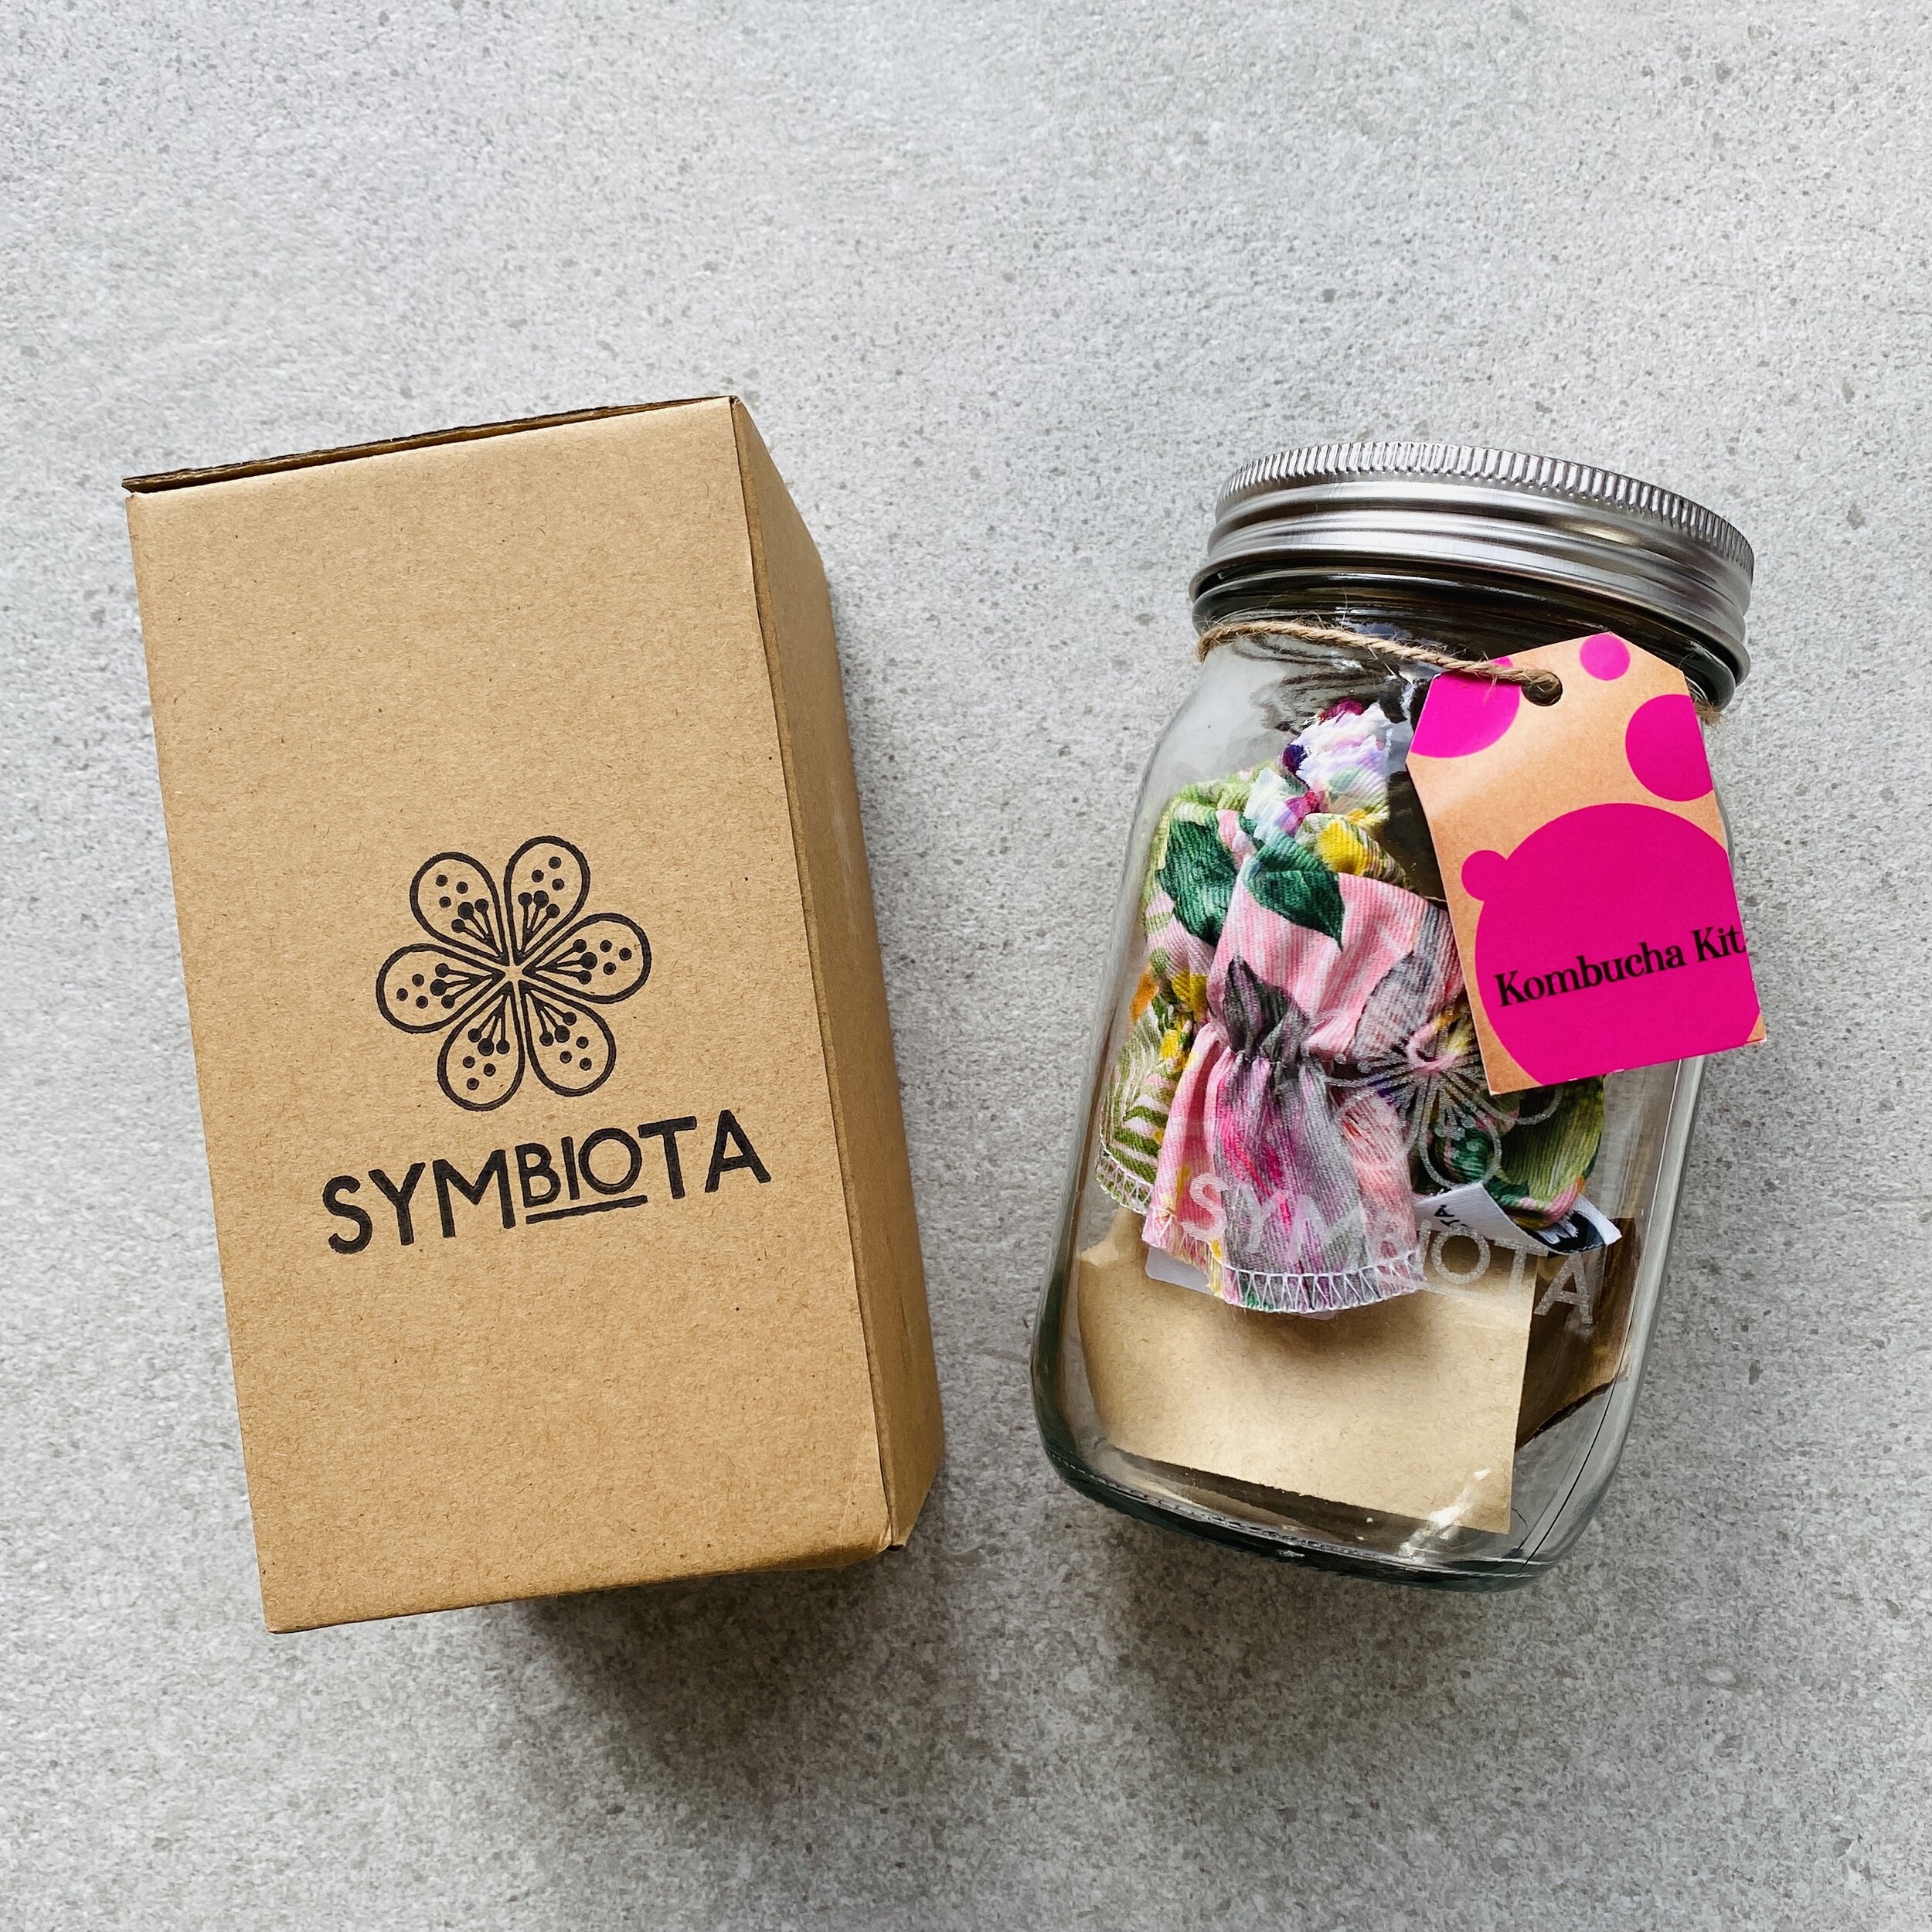 Symbiota Water Kefir Kit - Make Your Own Fermented Drink - Claire Turnbull  NZ Online Shop — Claire Turnbull